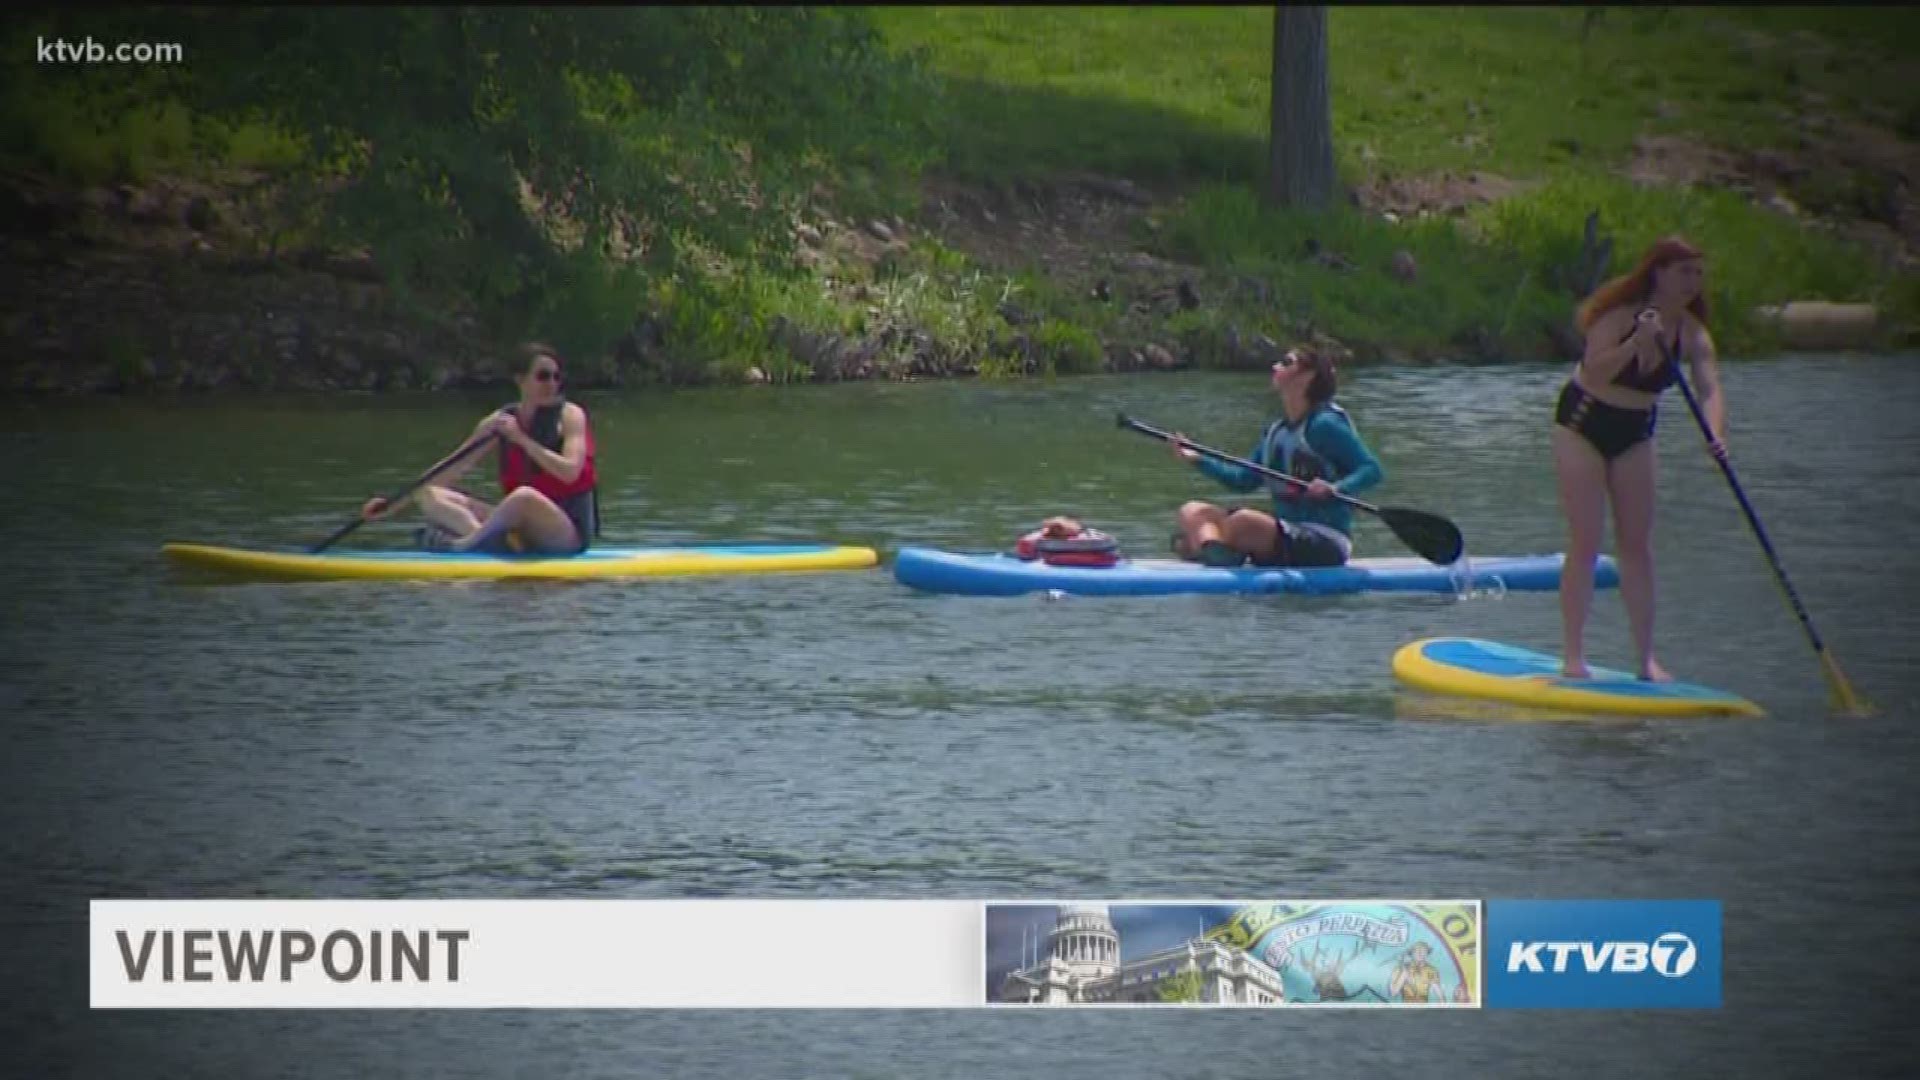 If you like floating, kayaking or even surfing on whitewater, or if you like exotic animals, July is the month for you. The Boise Parks and Recreation Department is getting ready to open two major, new attractions. Boise Parks and Recreation Director Doug Holloway talks about these major projects, what else is new in the Boise park system, plus plans for the 50th-anniversary celebration of the Boise River Greenbelt.